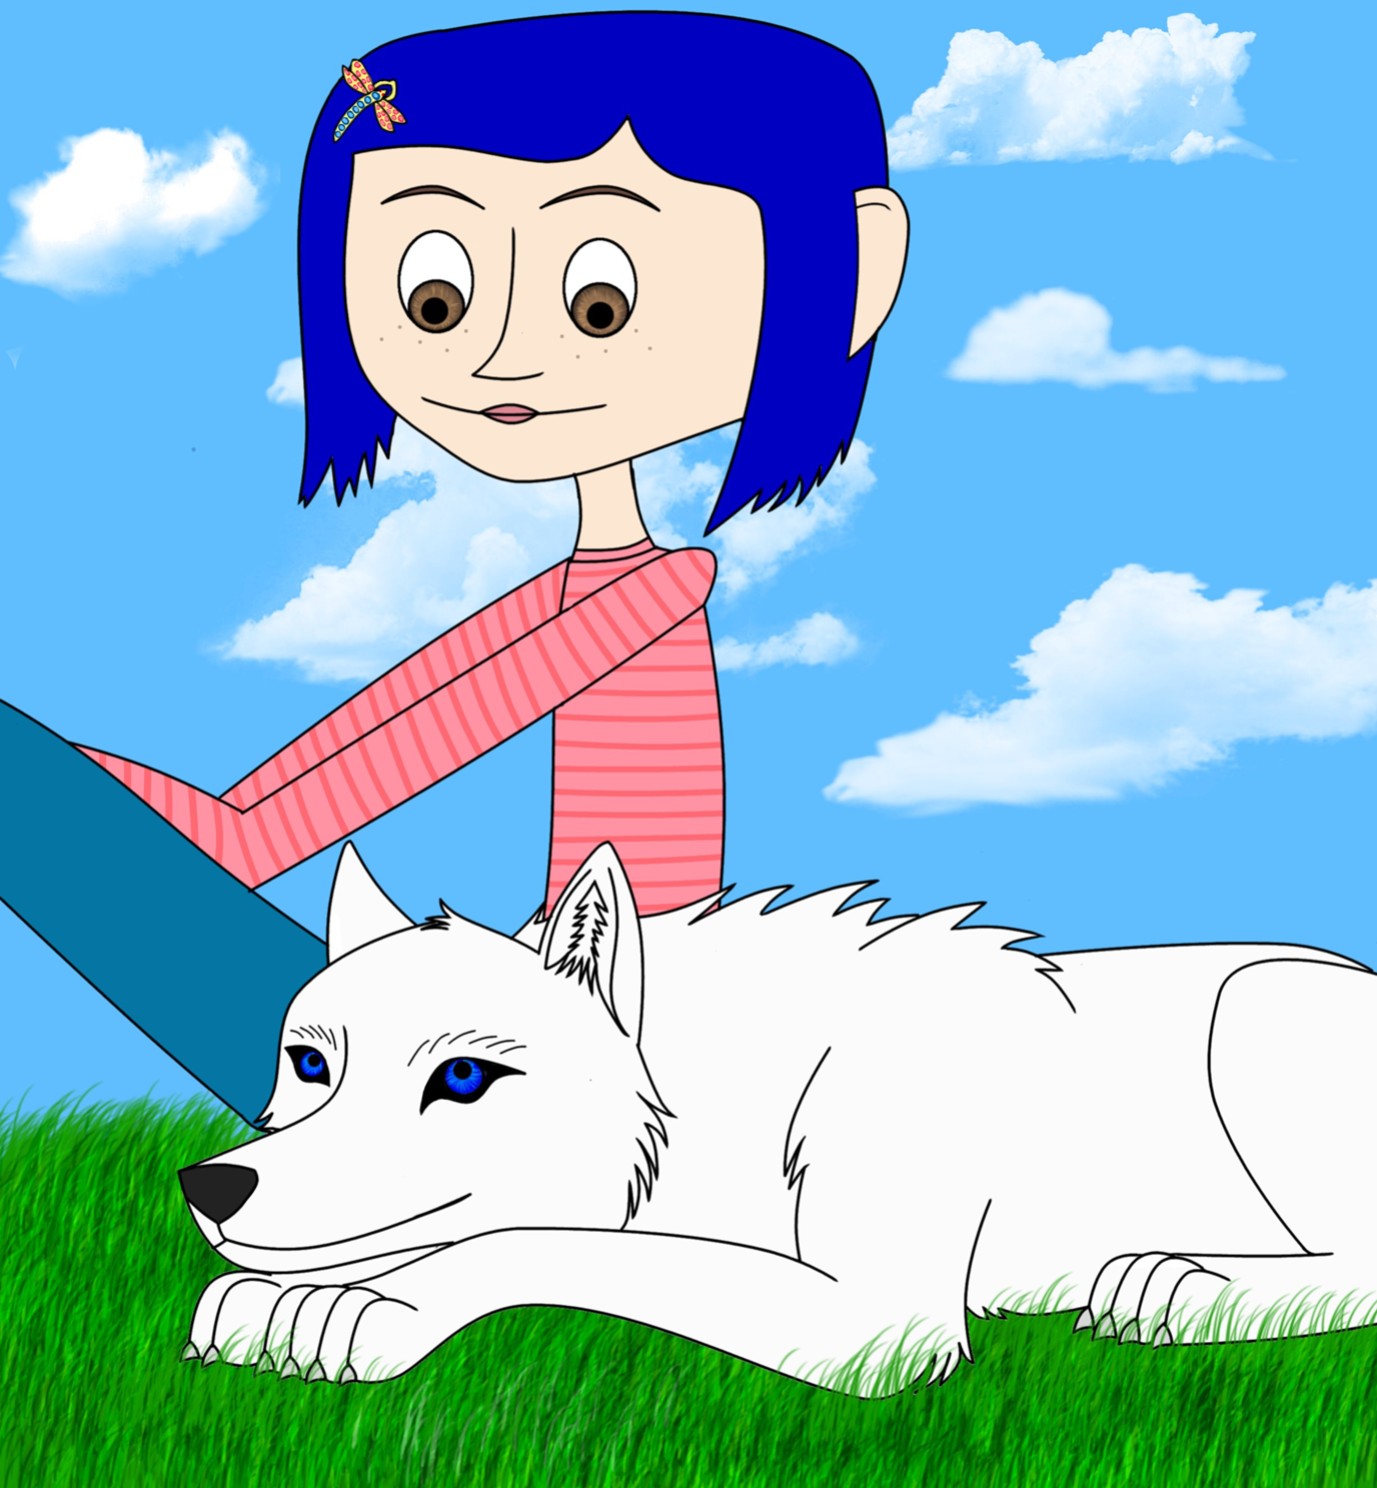 Aniu and Coraline-BFF by Emily99